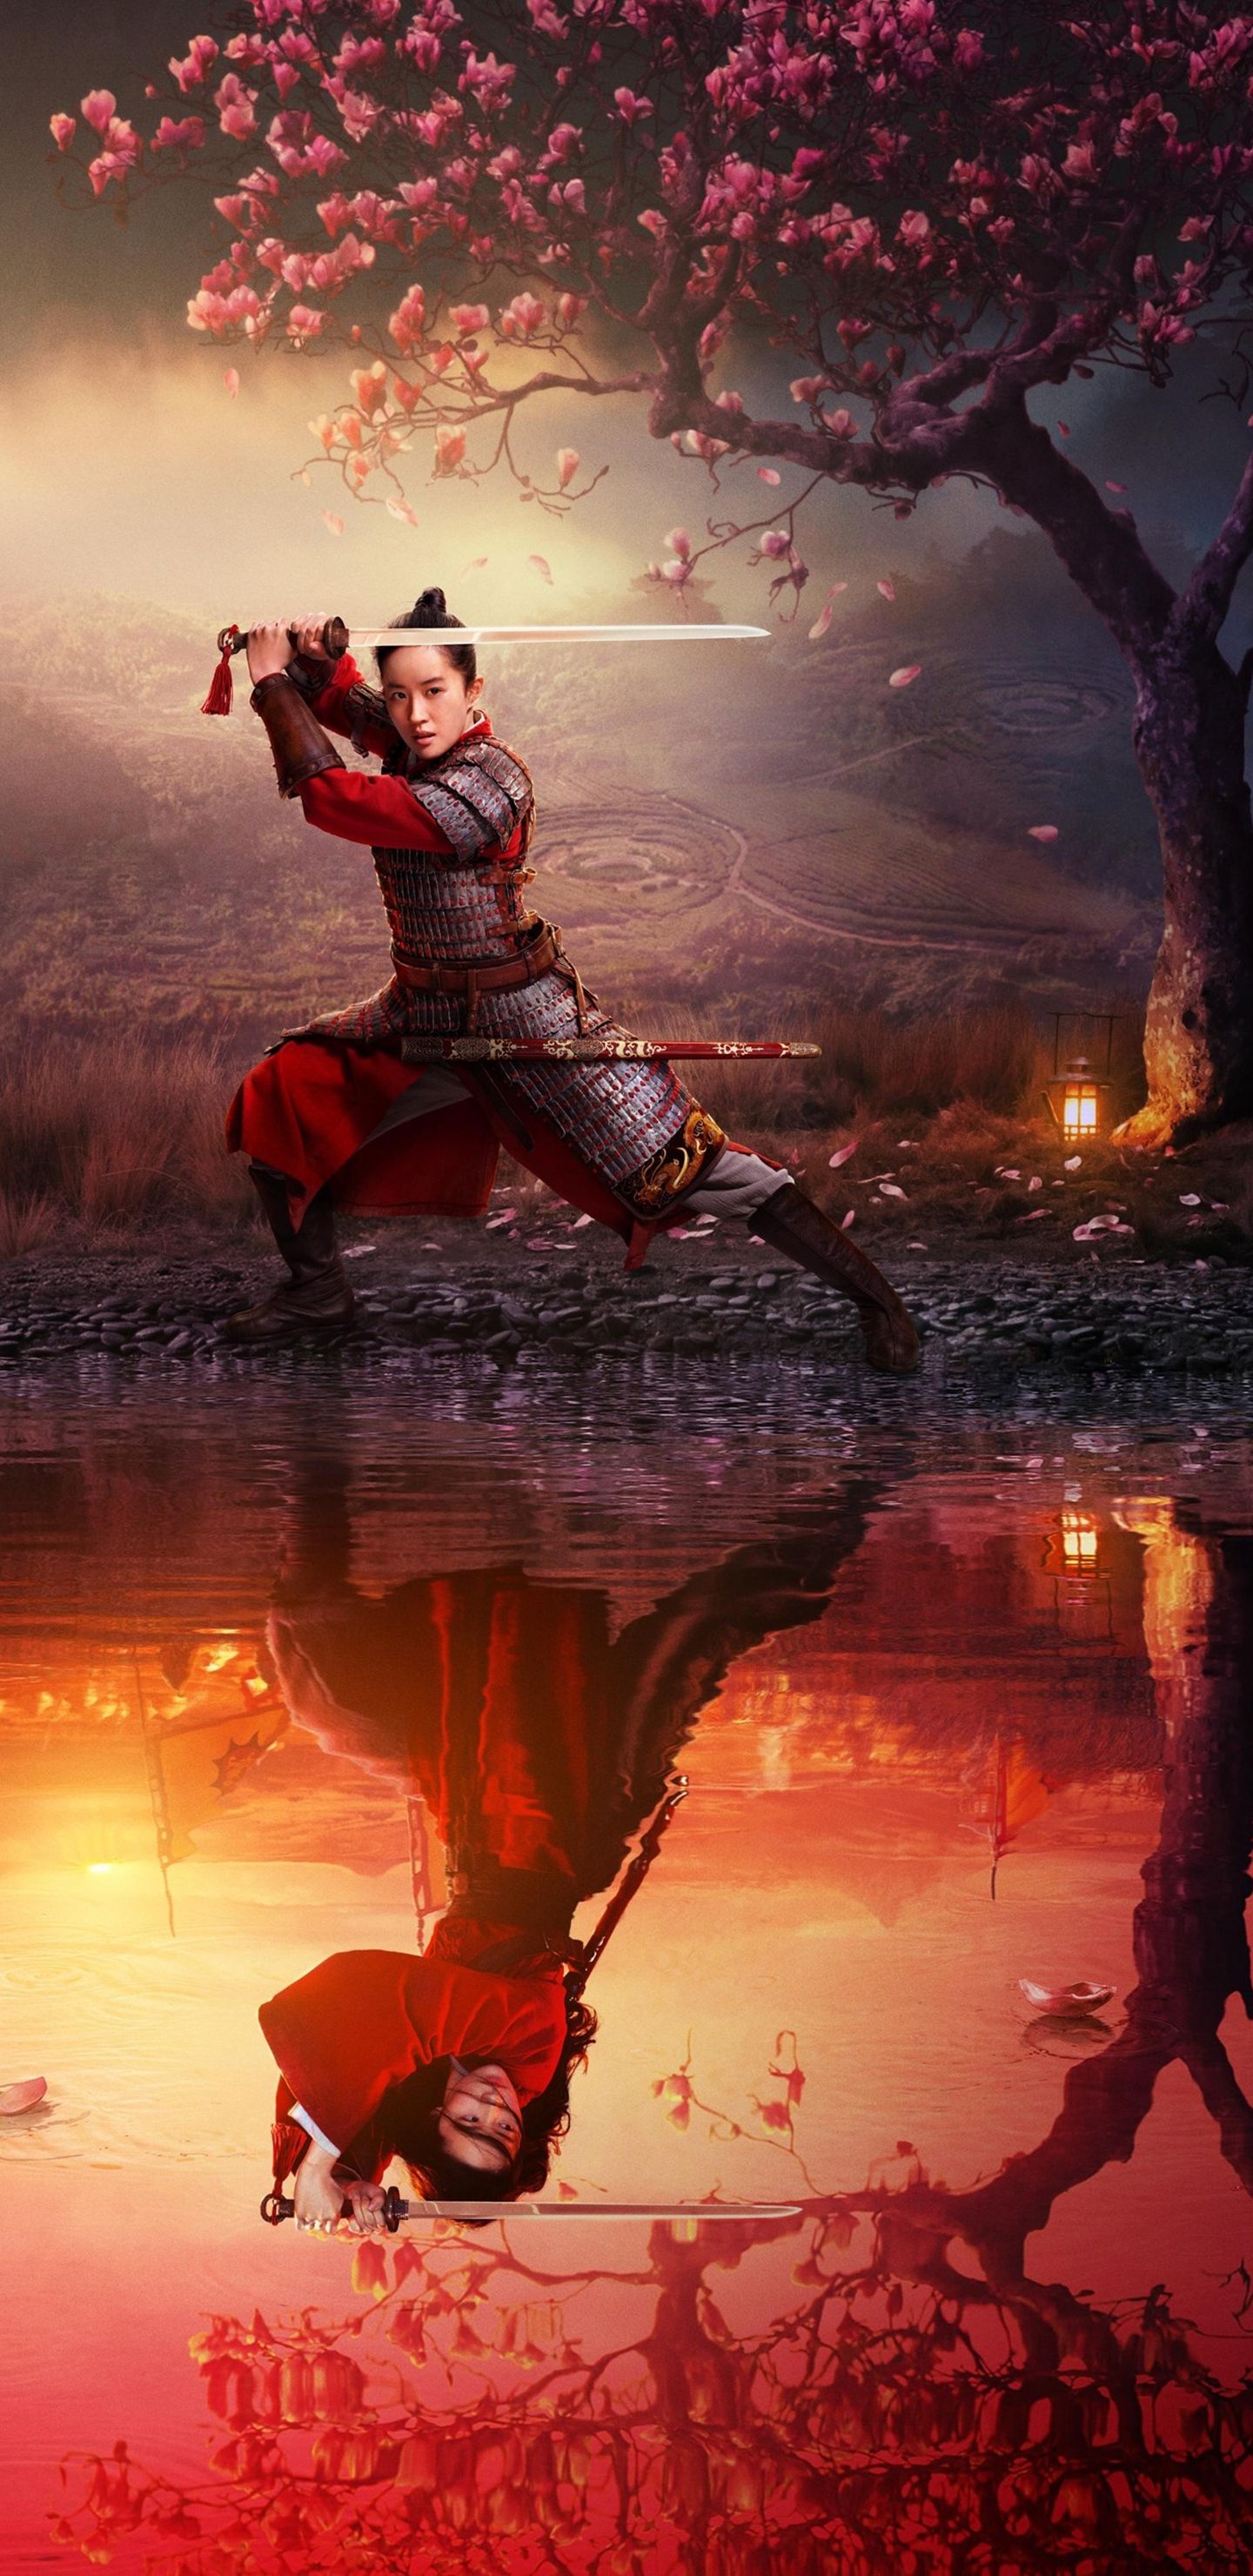 Mulan Movie 2020 Poster Samsung Galaxy Note S S SQHD HD 4k Wallpaper, Image, Background, Photo and Picture